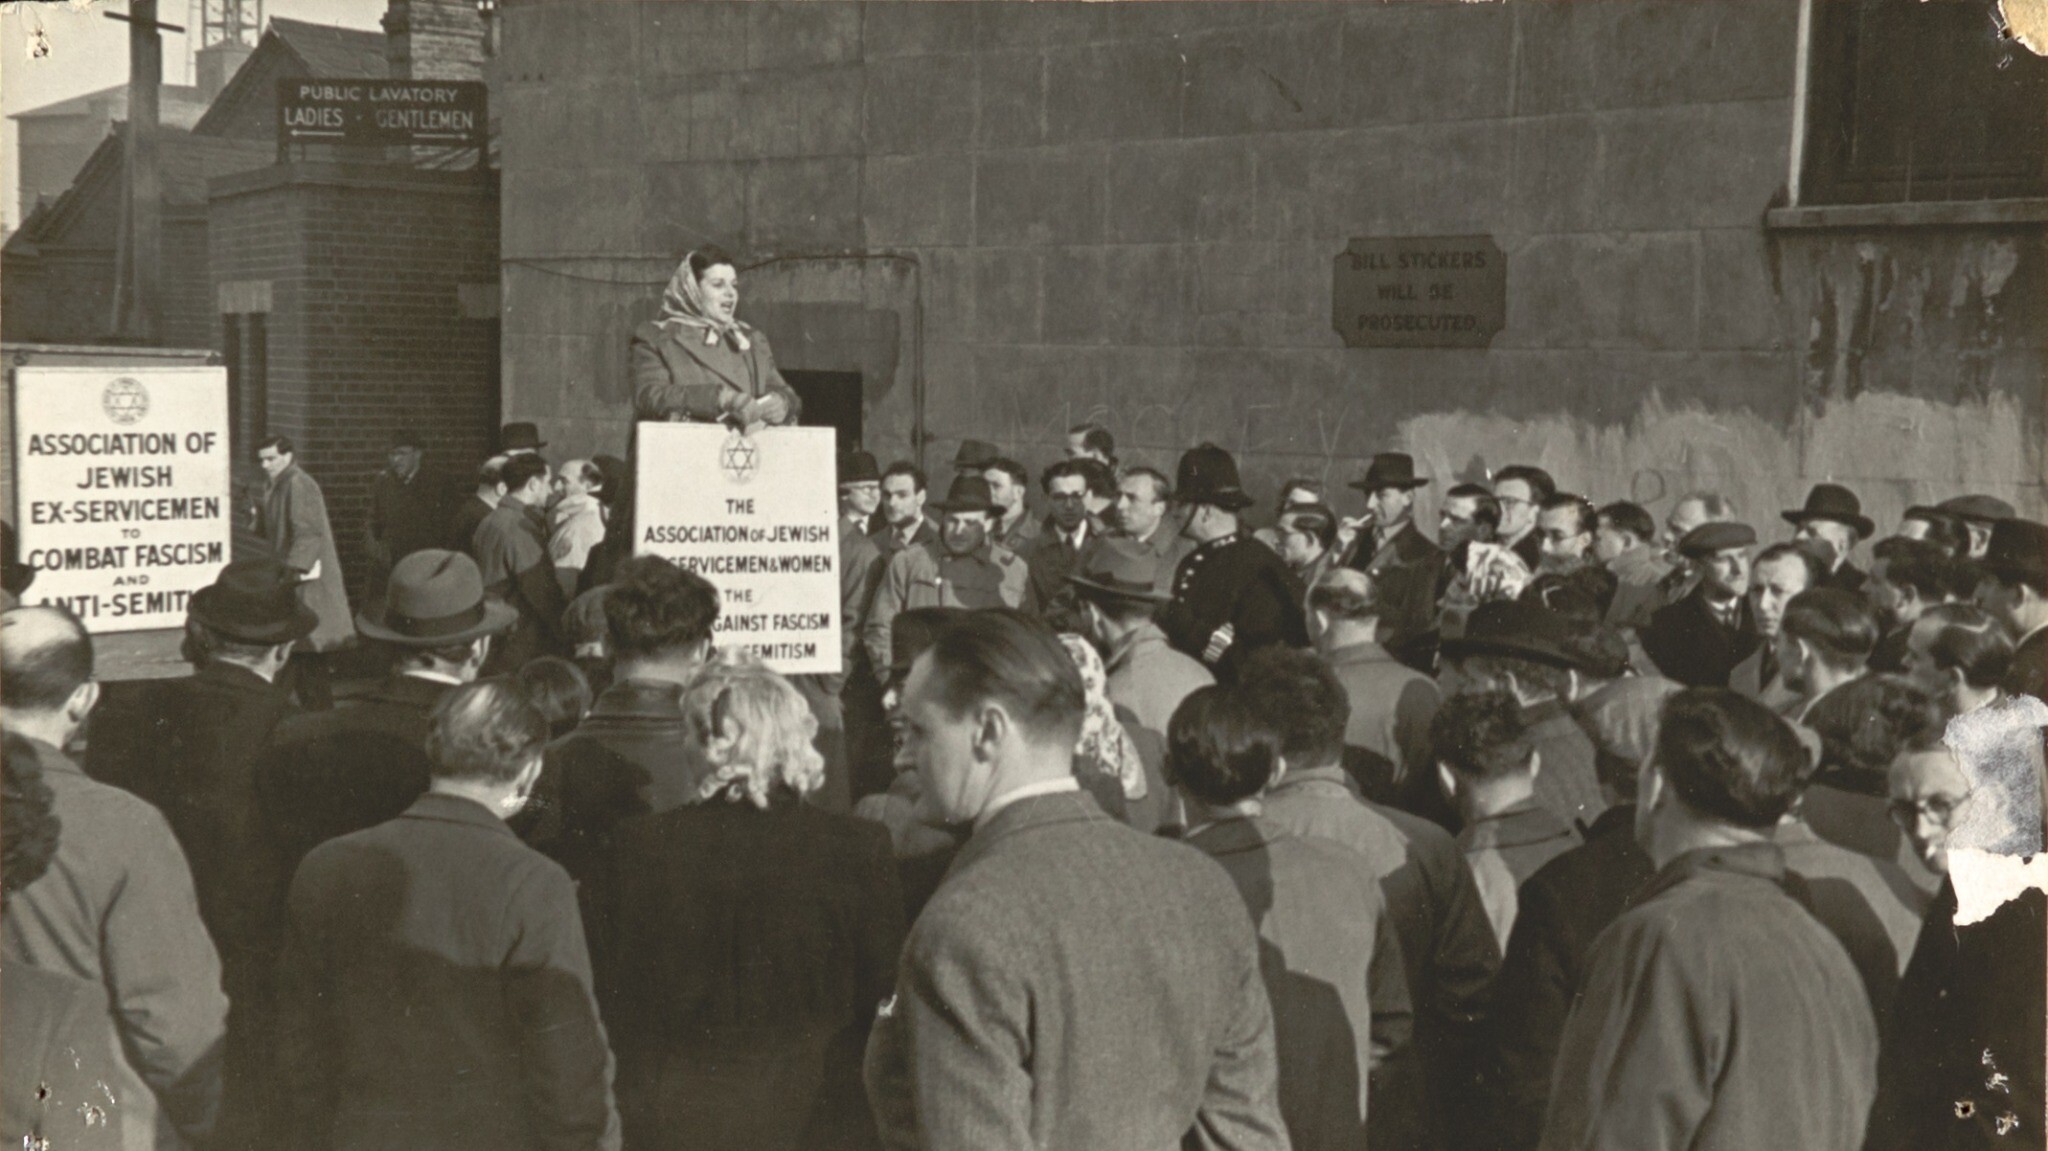 A speaker against antisemitism at a protest at London's Ridley Road, 1948. (Courtesy Community Security Trust)